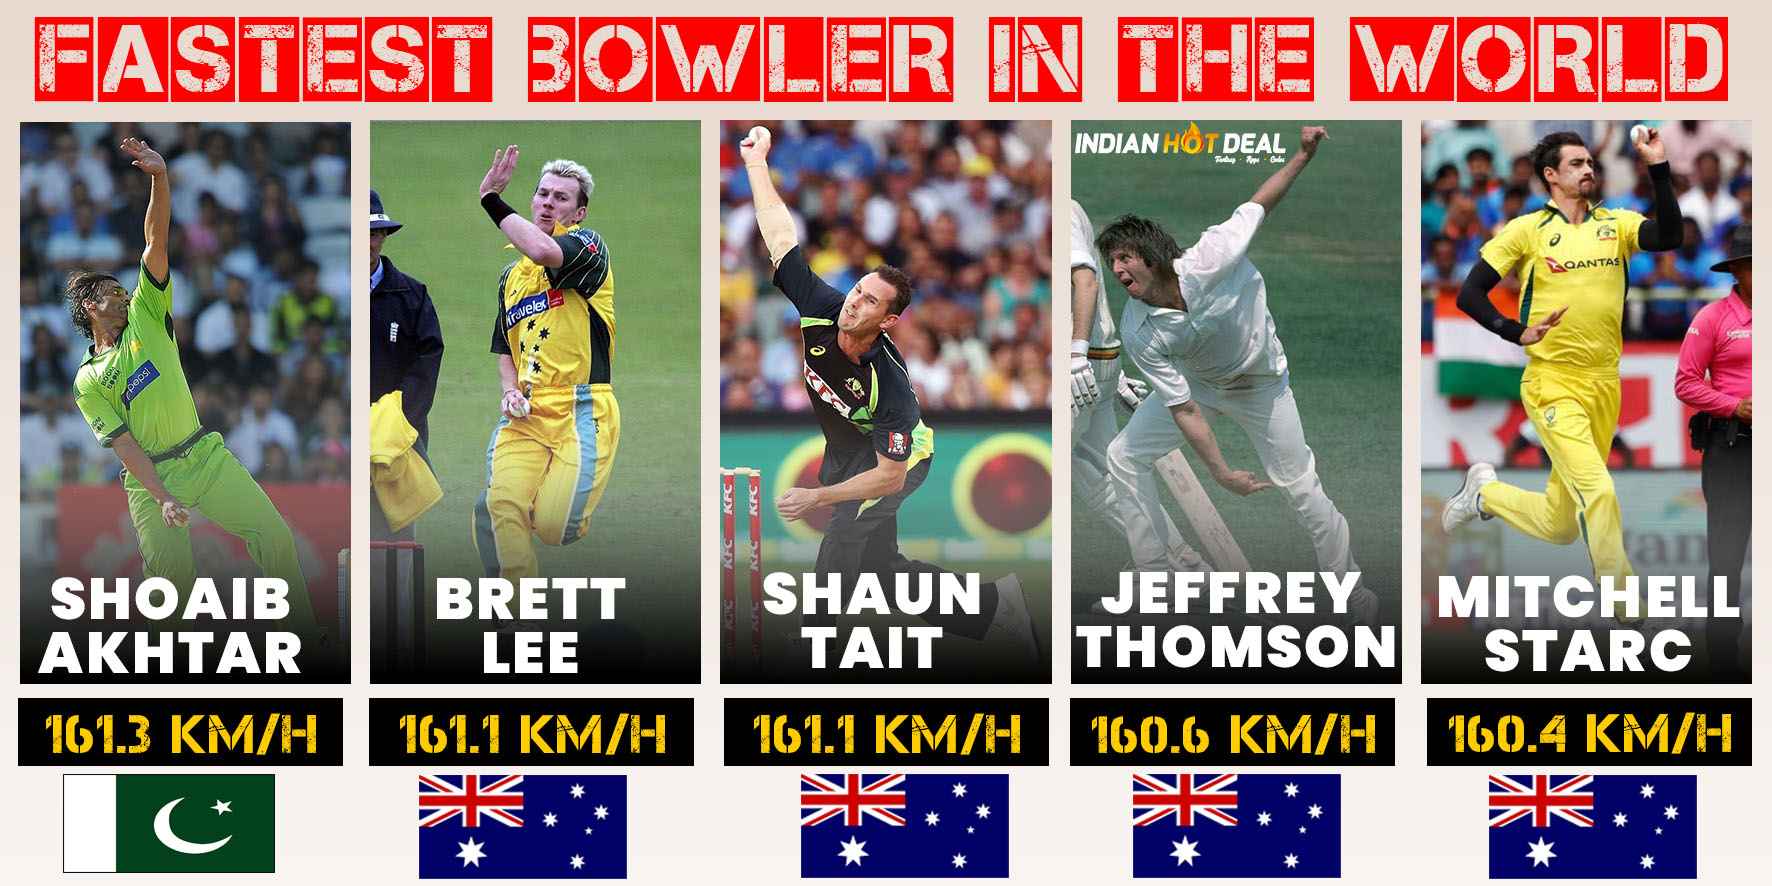 Fastest Bowler In The World